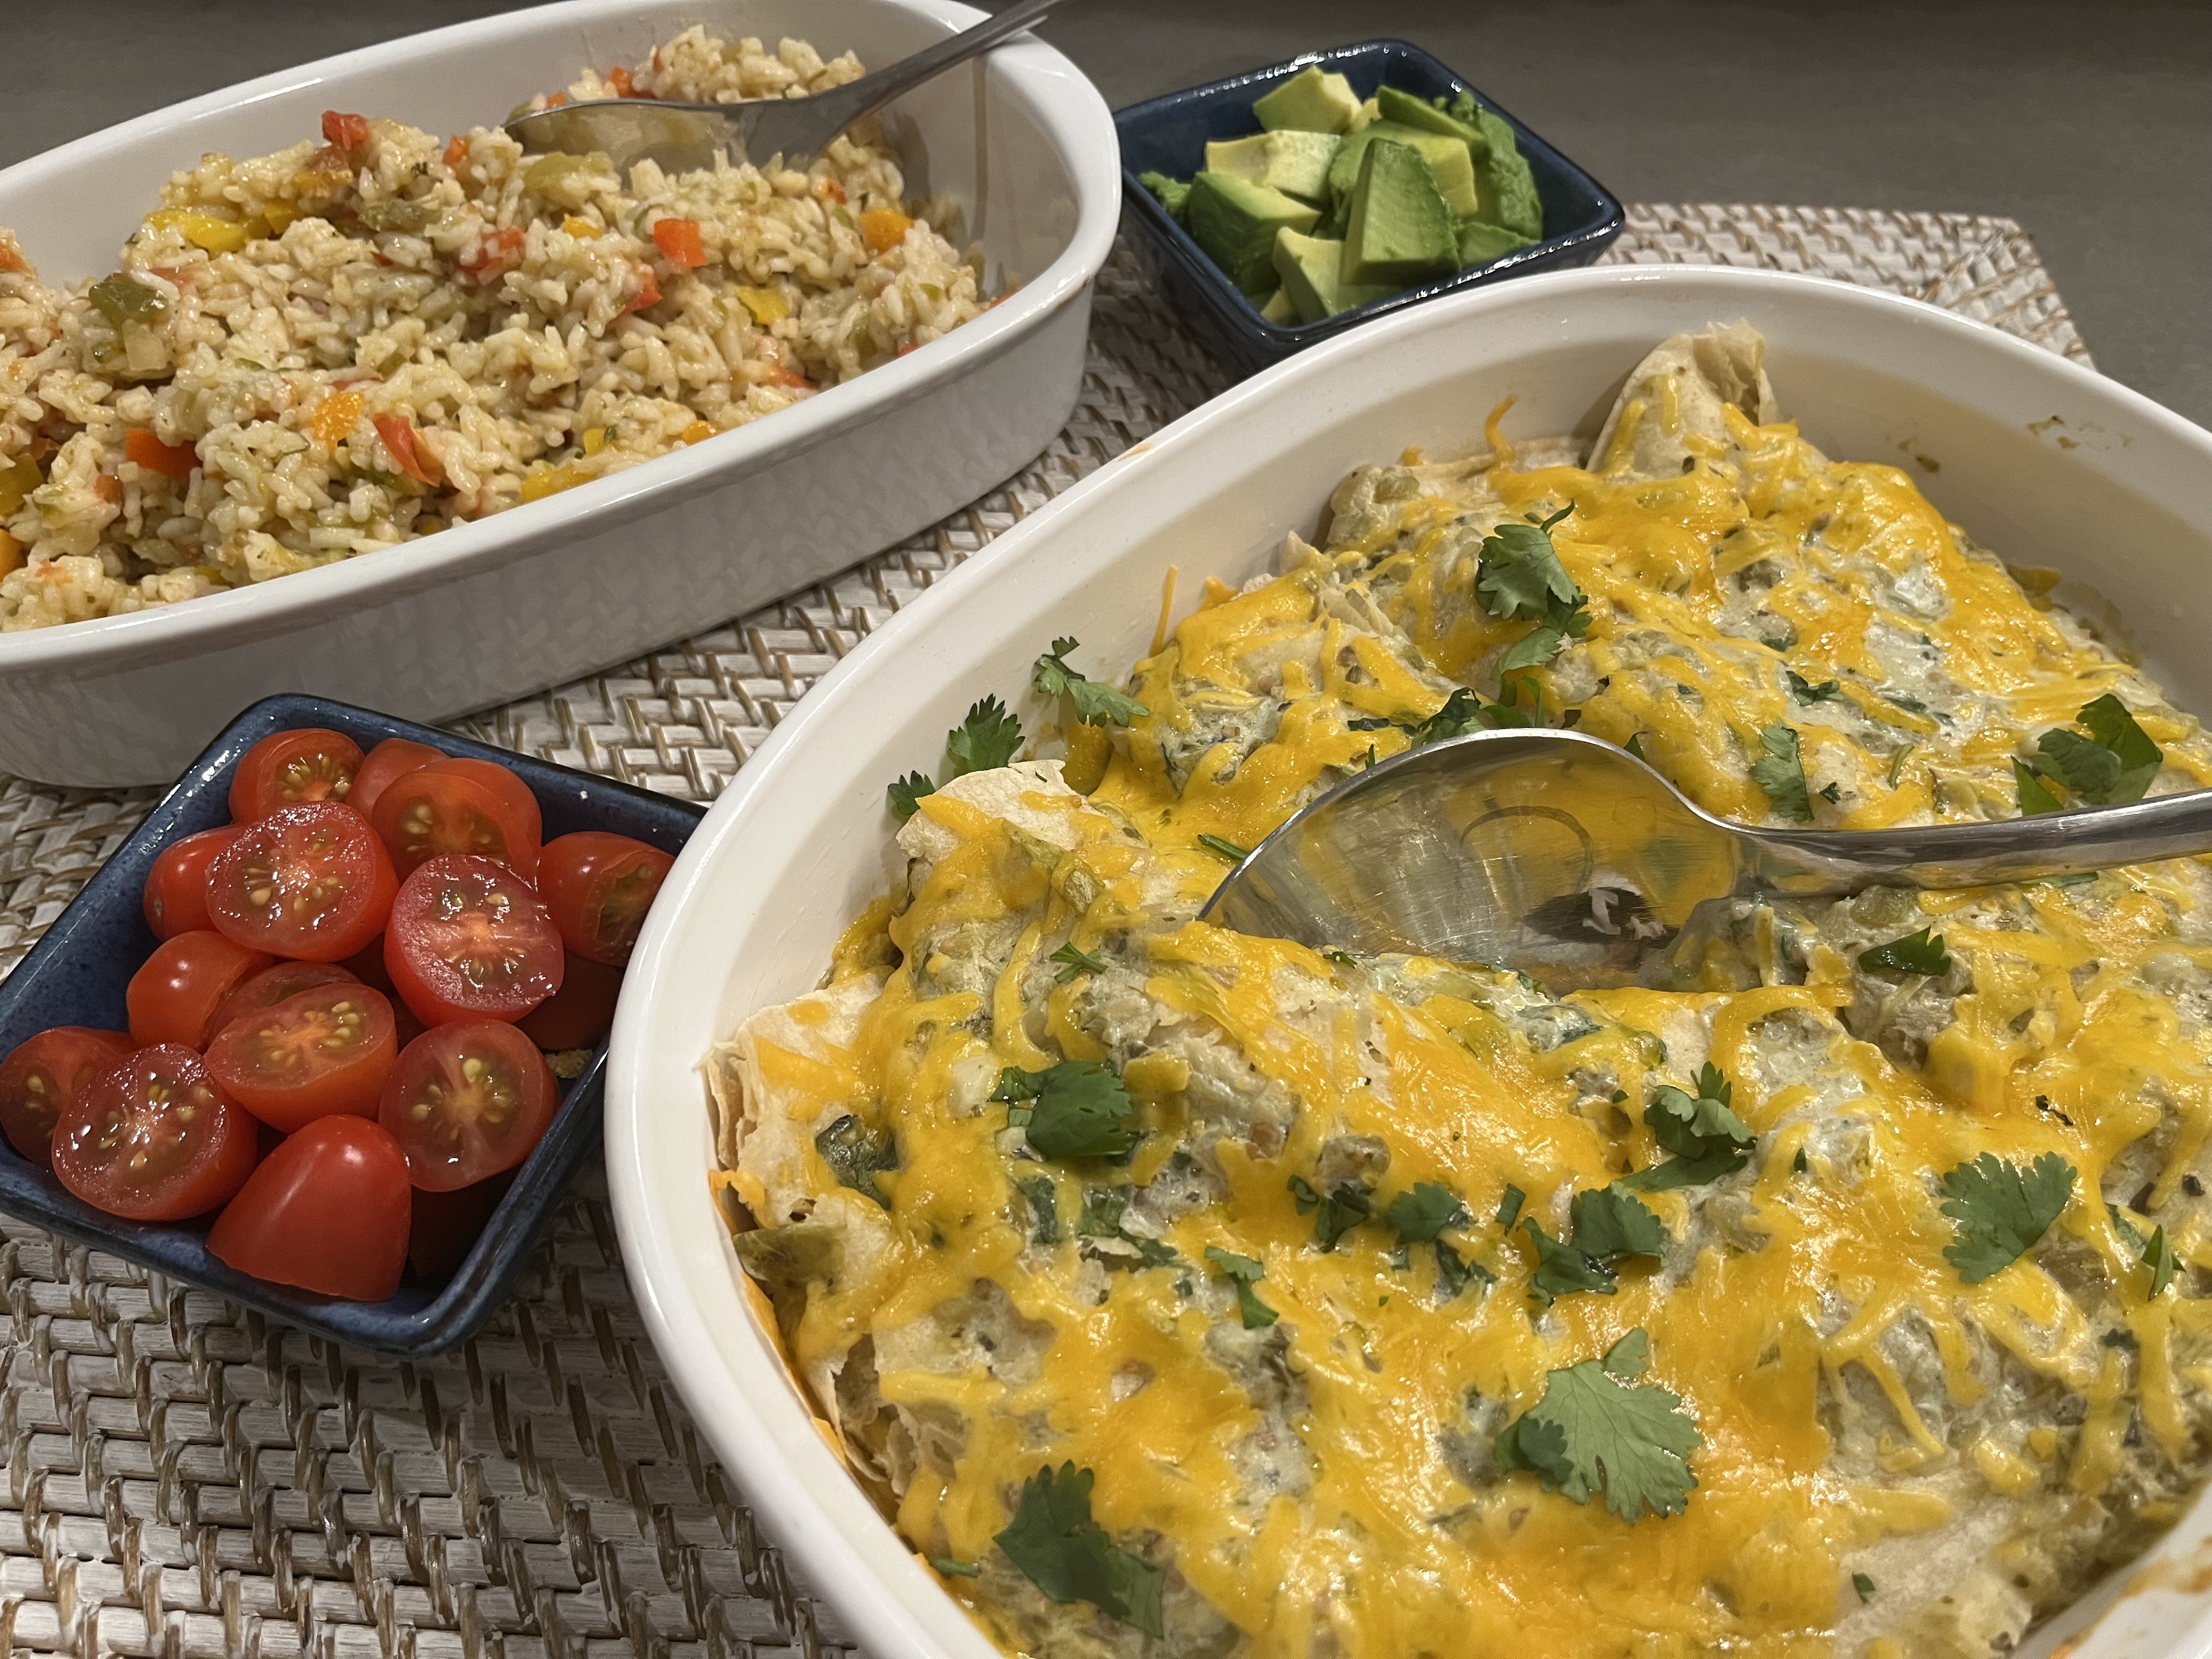 New Canaan Farms Verde Chili Salsa Mexican Rice with Chicken Enchiladas, tomatoes and avocados